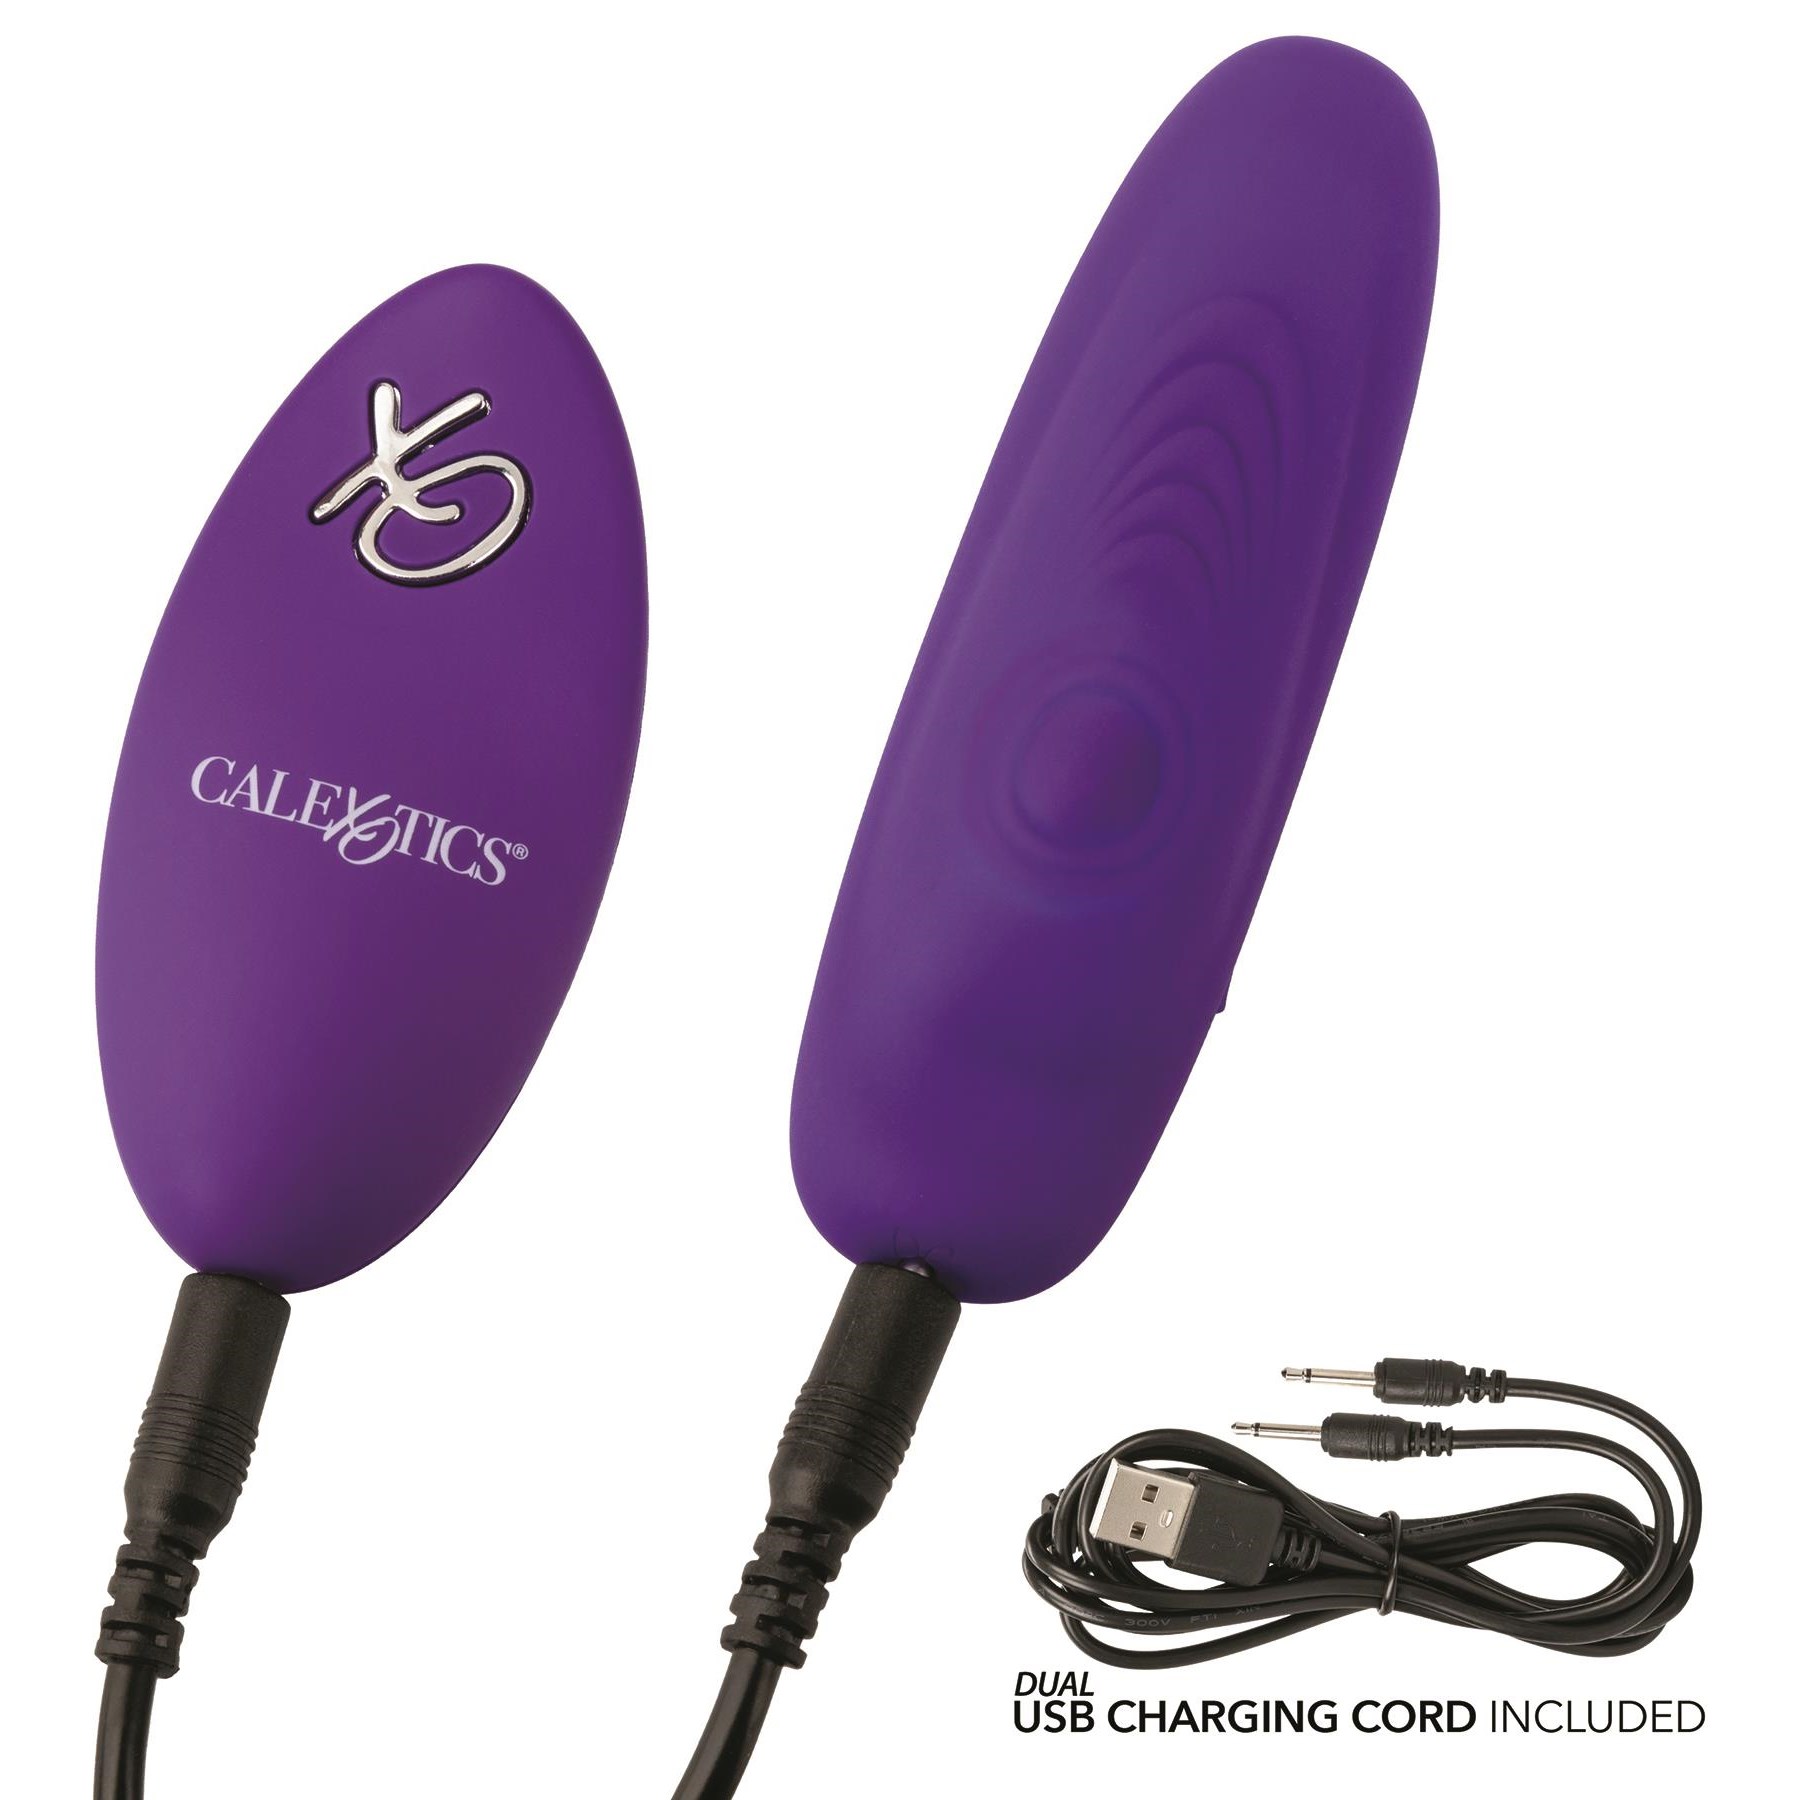 Lock-N-Play Remote Pulsating Panty Teaser - Showing Where Charging Cables are Placed